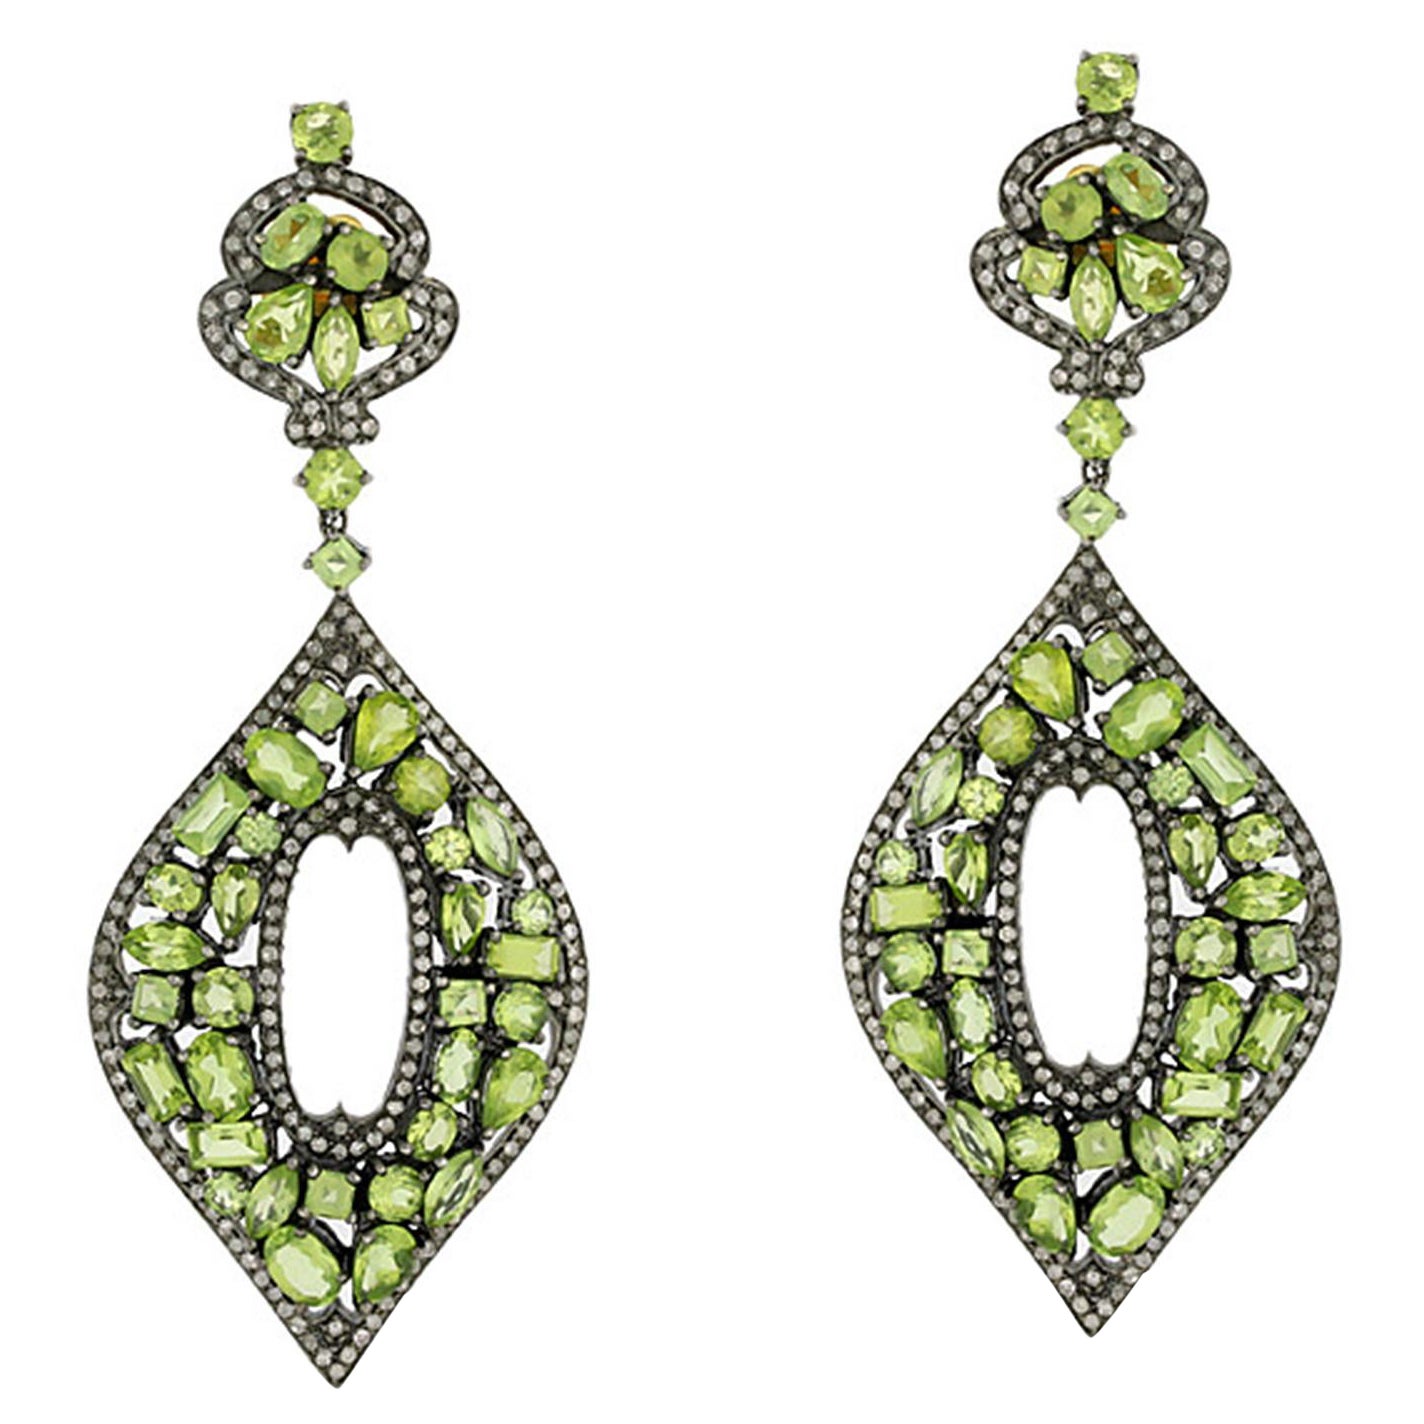 Mixed Shaped Peridot Earrings Adorned with Pave Diamonds In 18k Gold ...